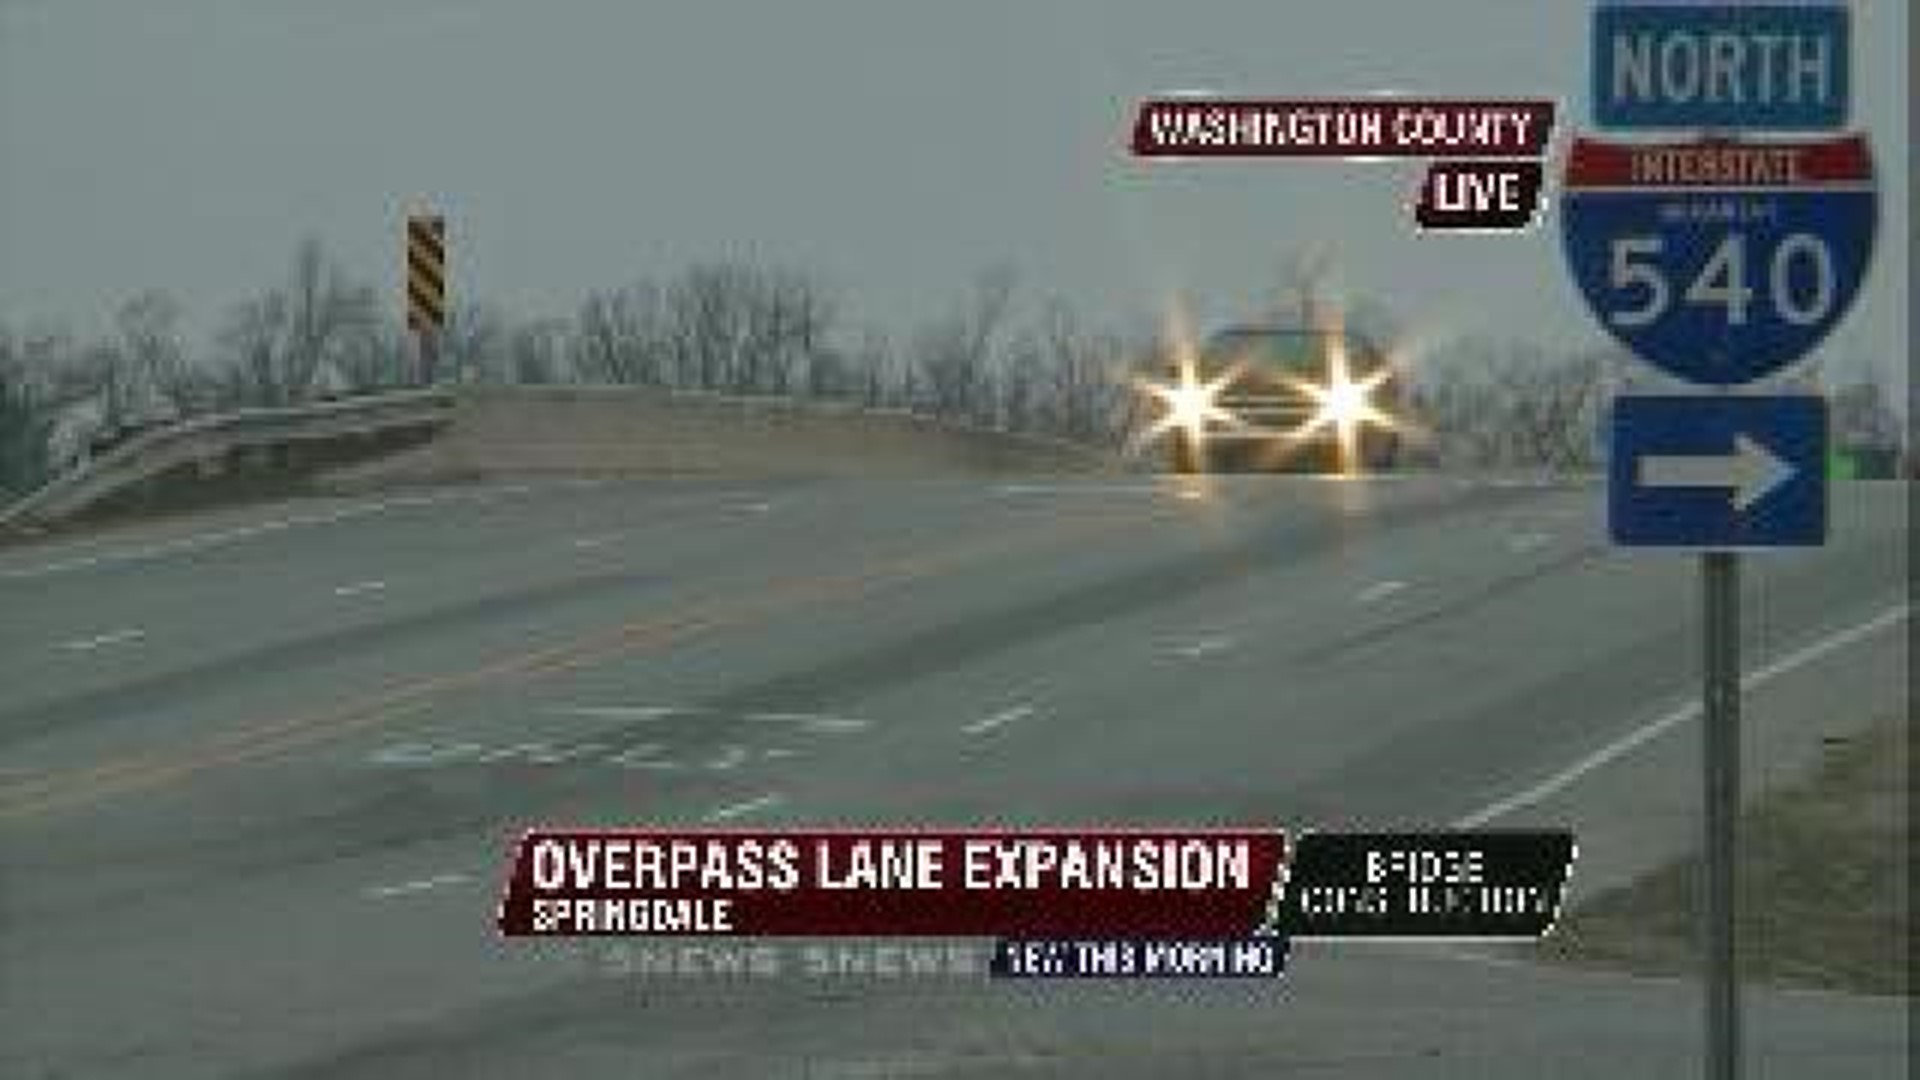 Overpass Lane Expansion